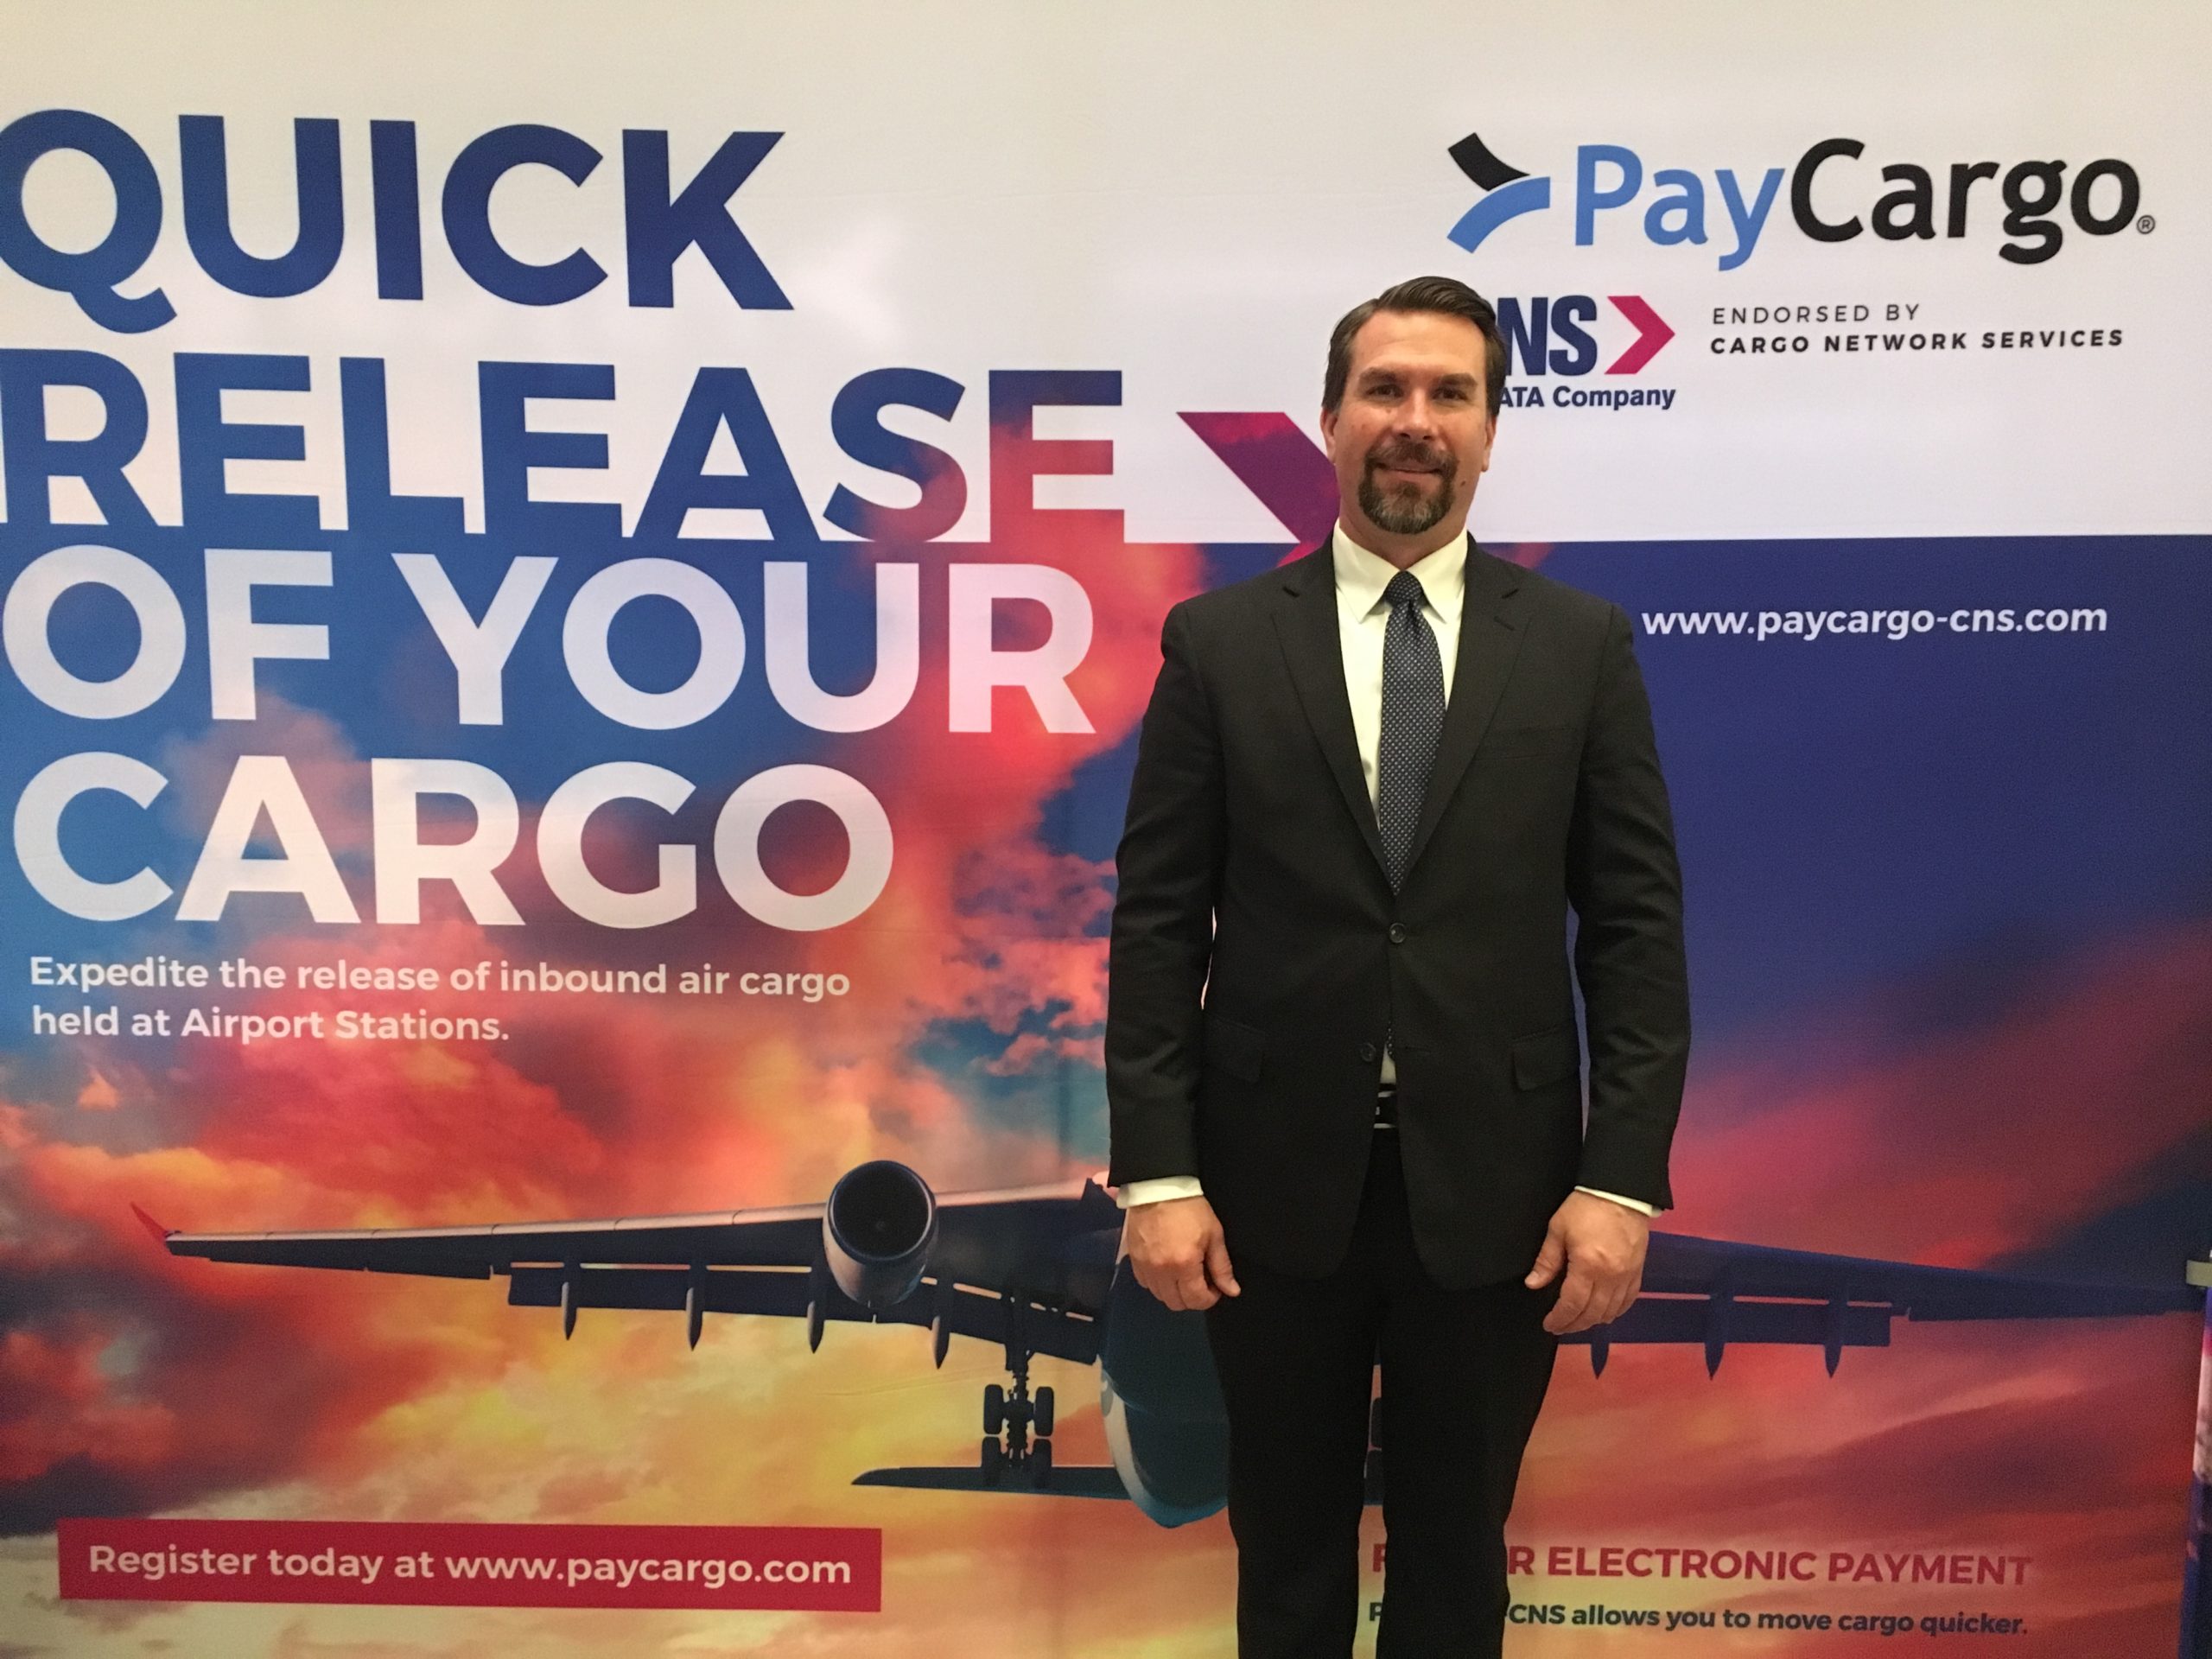 PayCargo LLC announced the appointment of Lionel van der Walt as its President and CEO, the Americas.